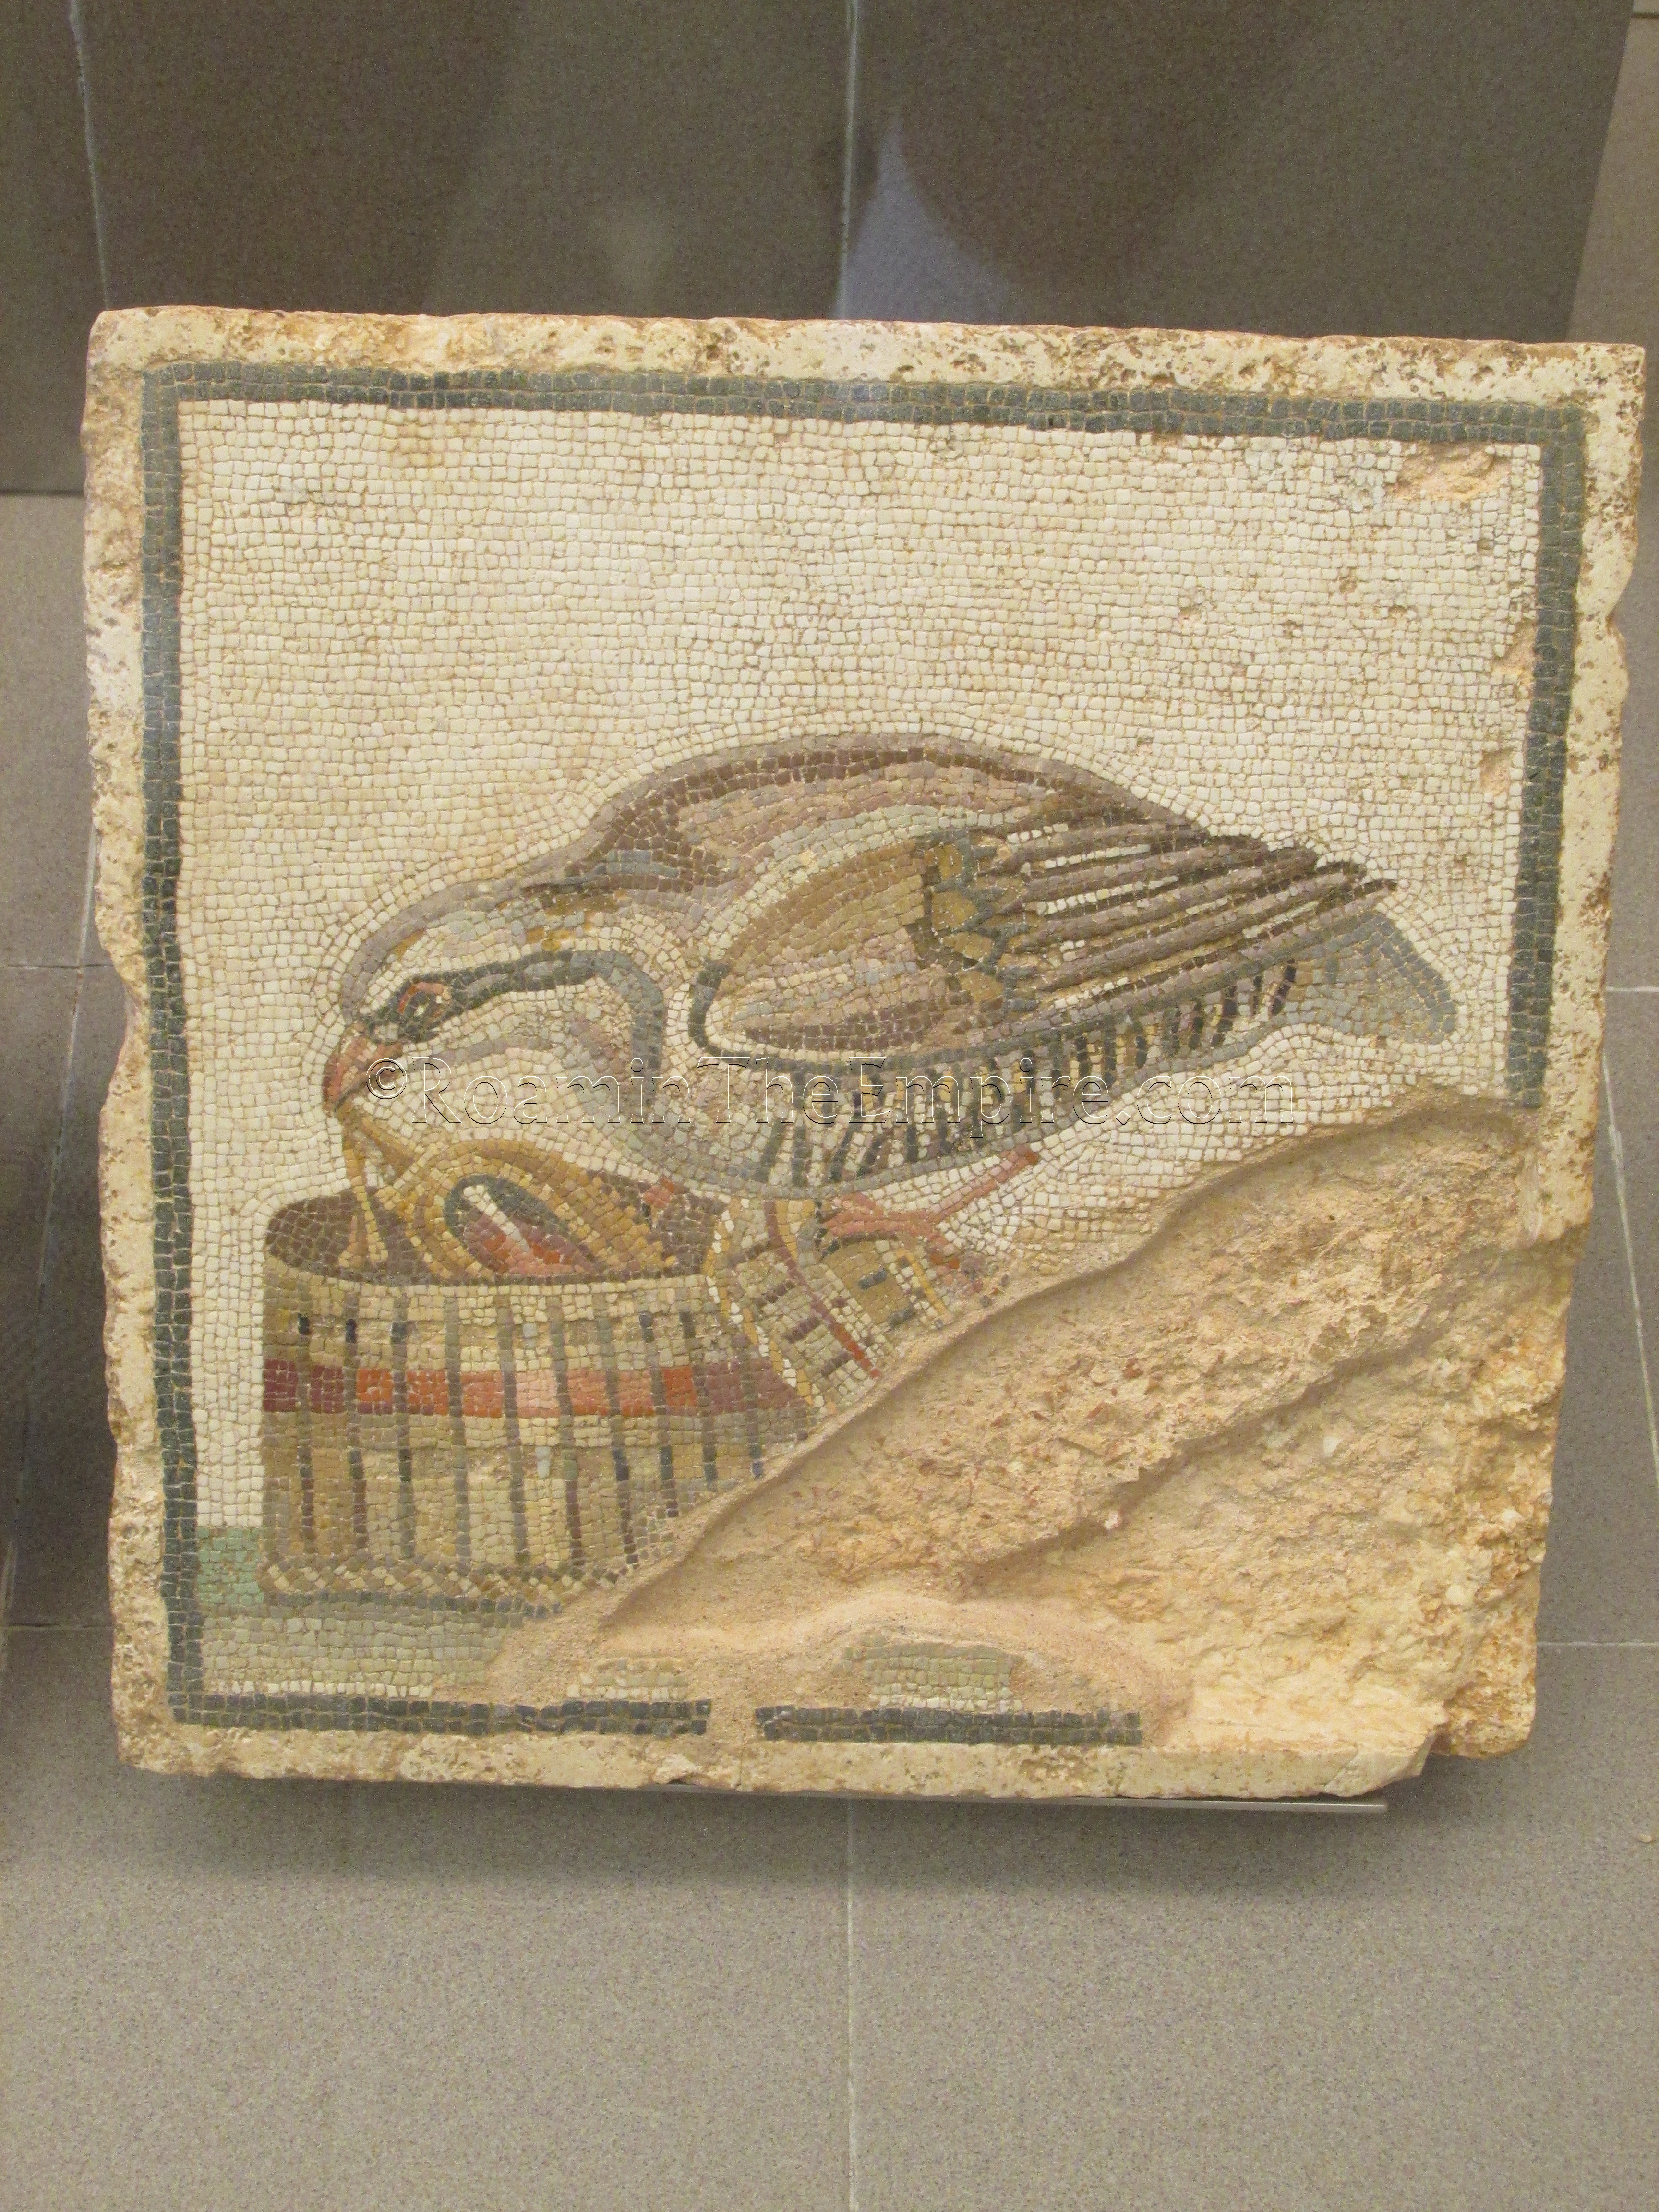 Mosaic panel of a partridge stealing jewelry from a box.